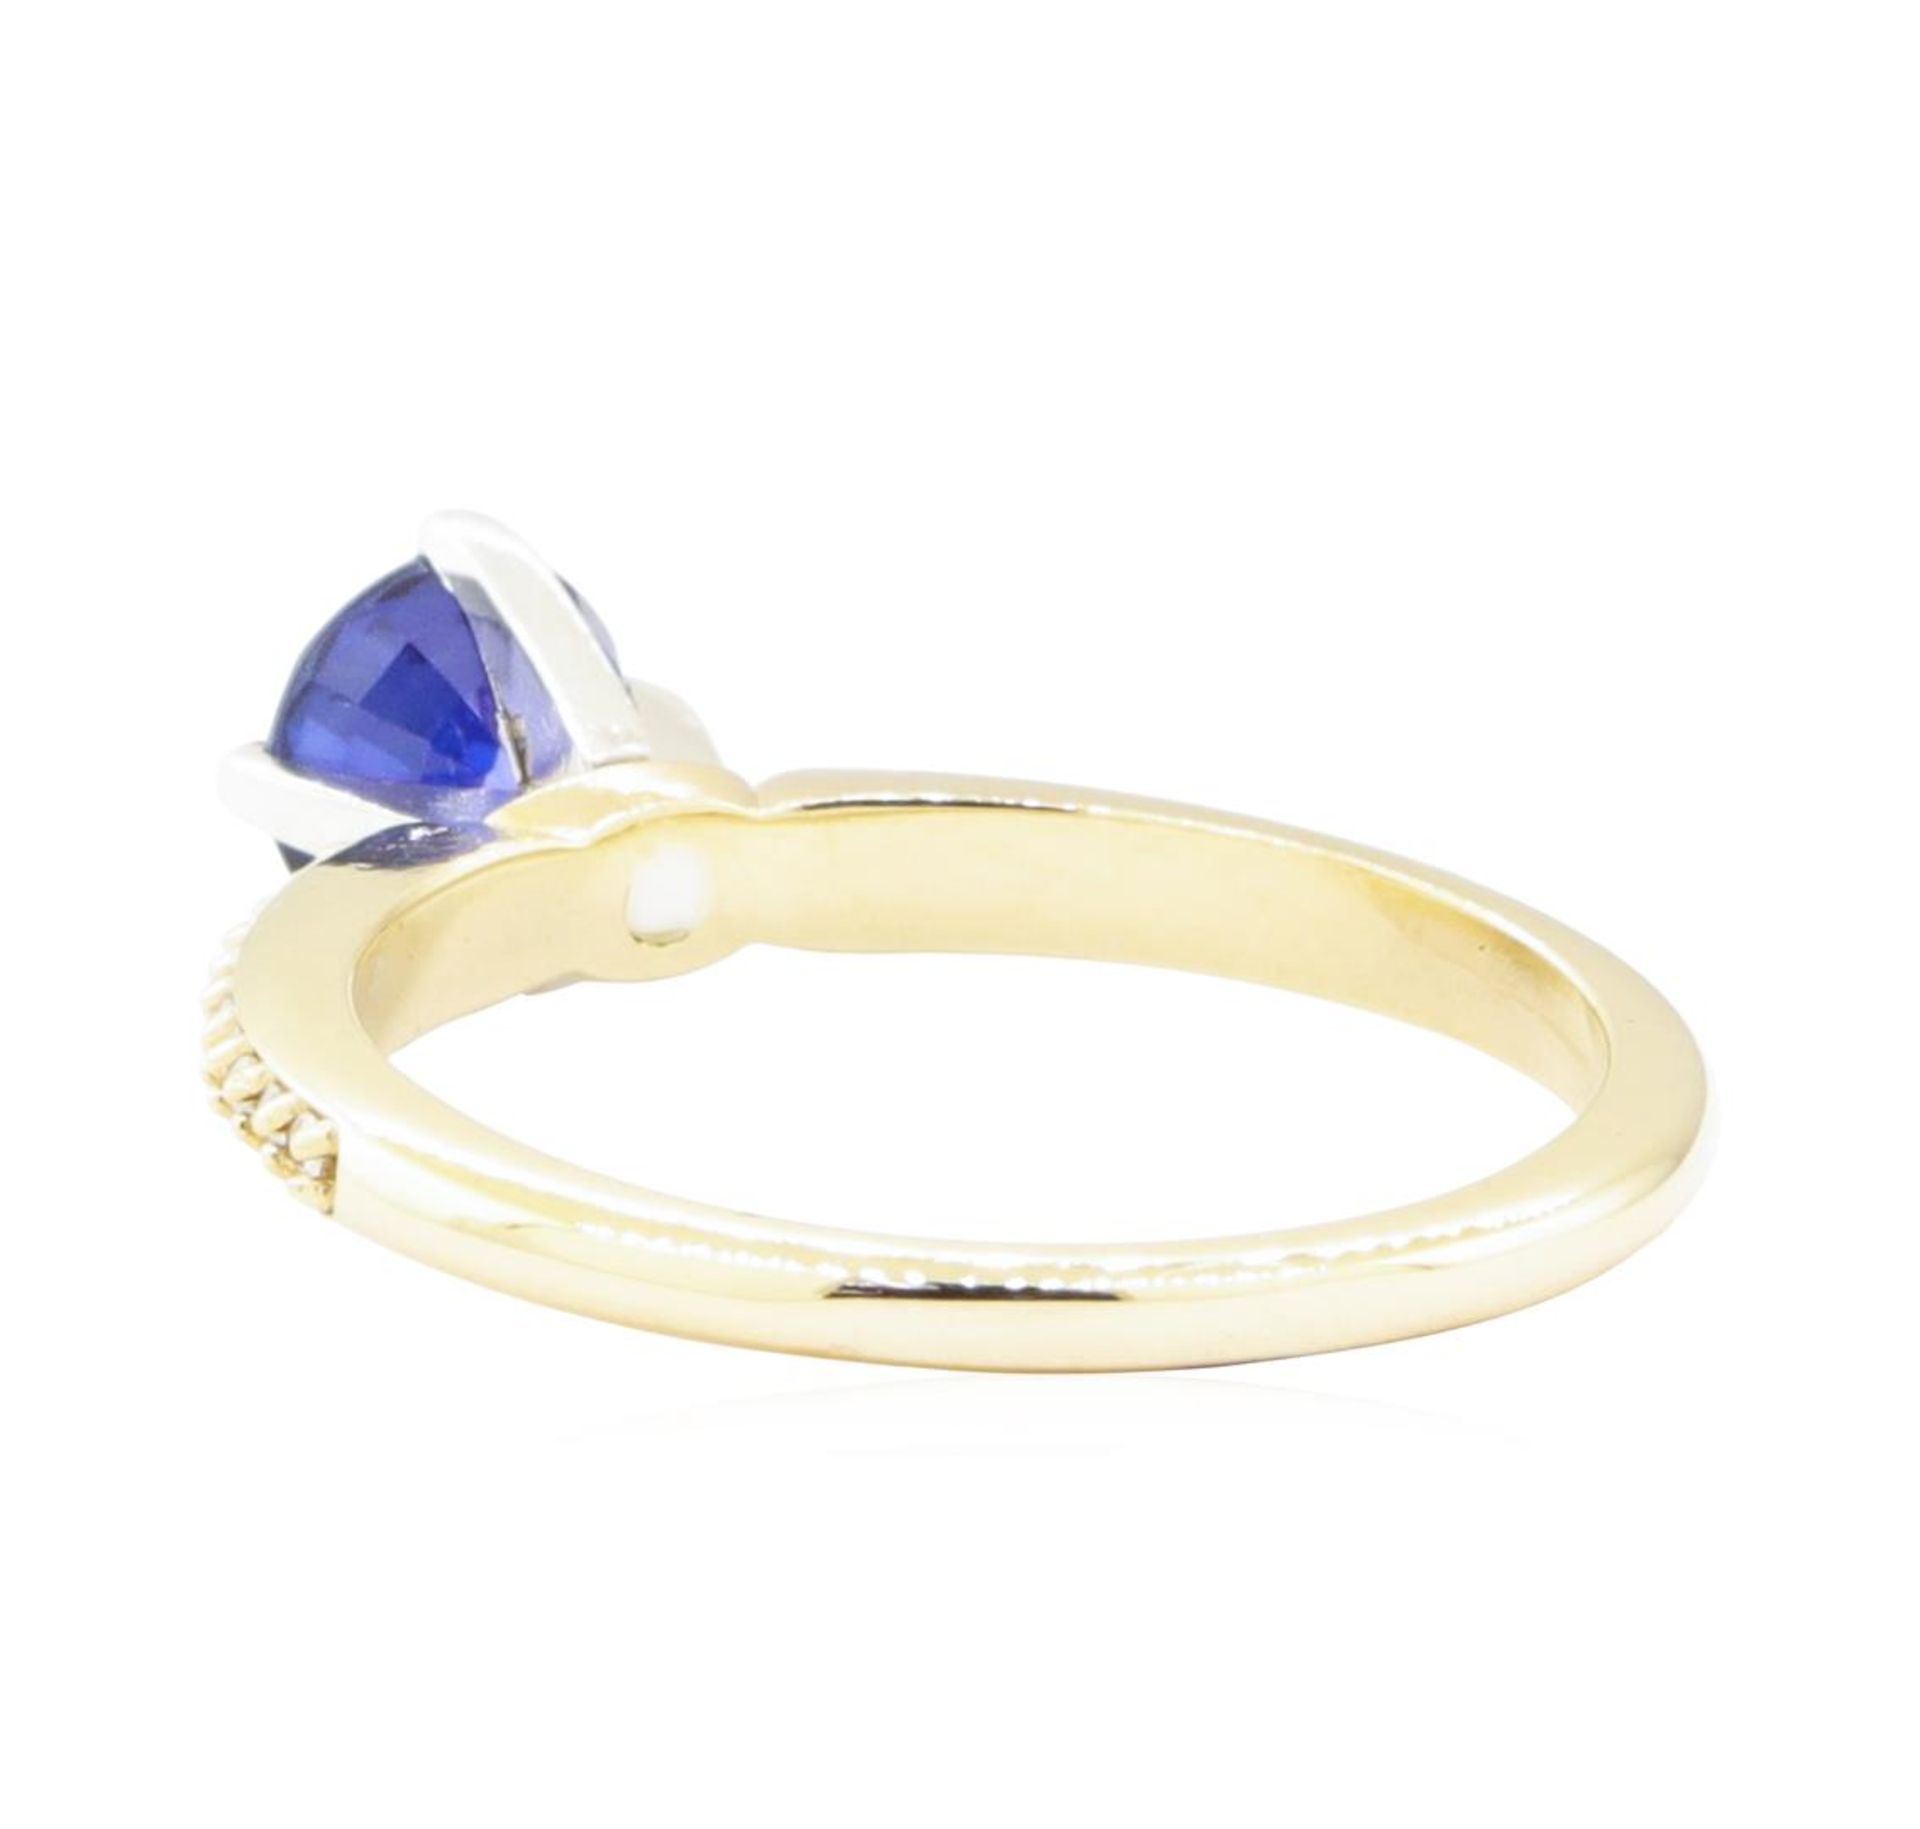 1.52 ctw Sapphire and Diamond Ring - 14KT Yellow Gold - Image 3 of 4